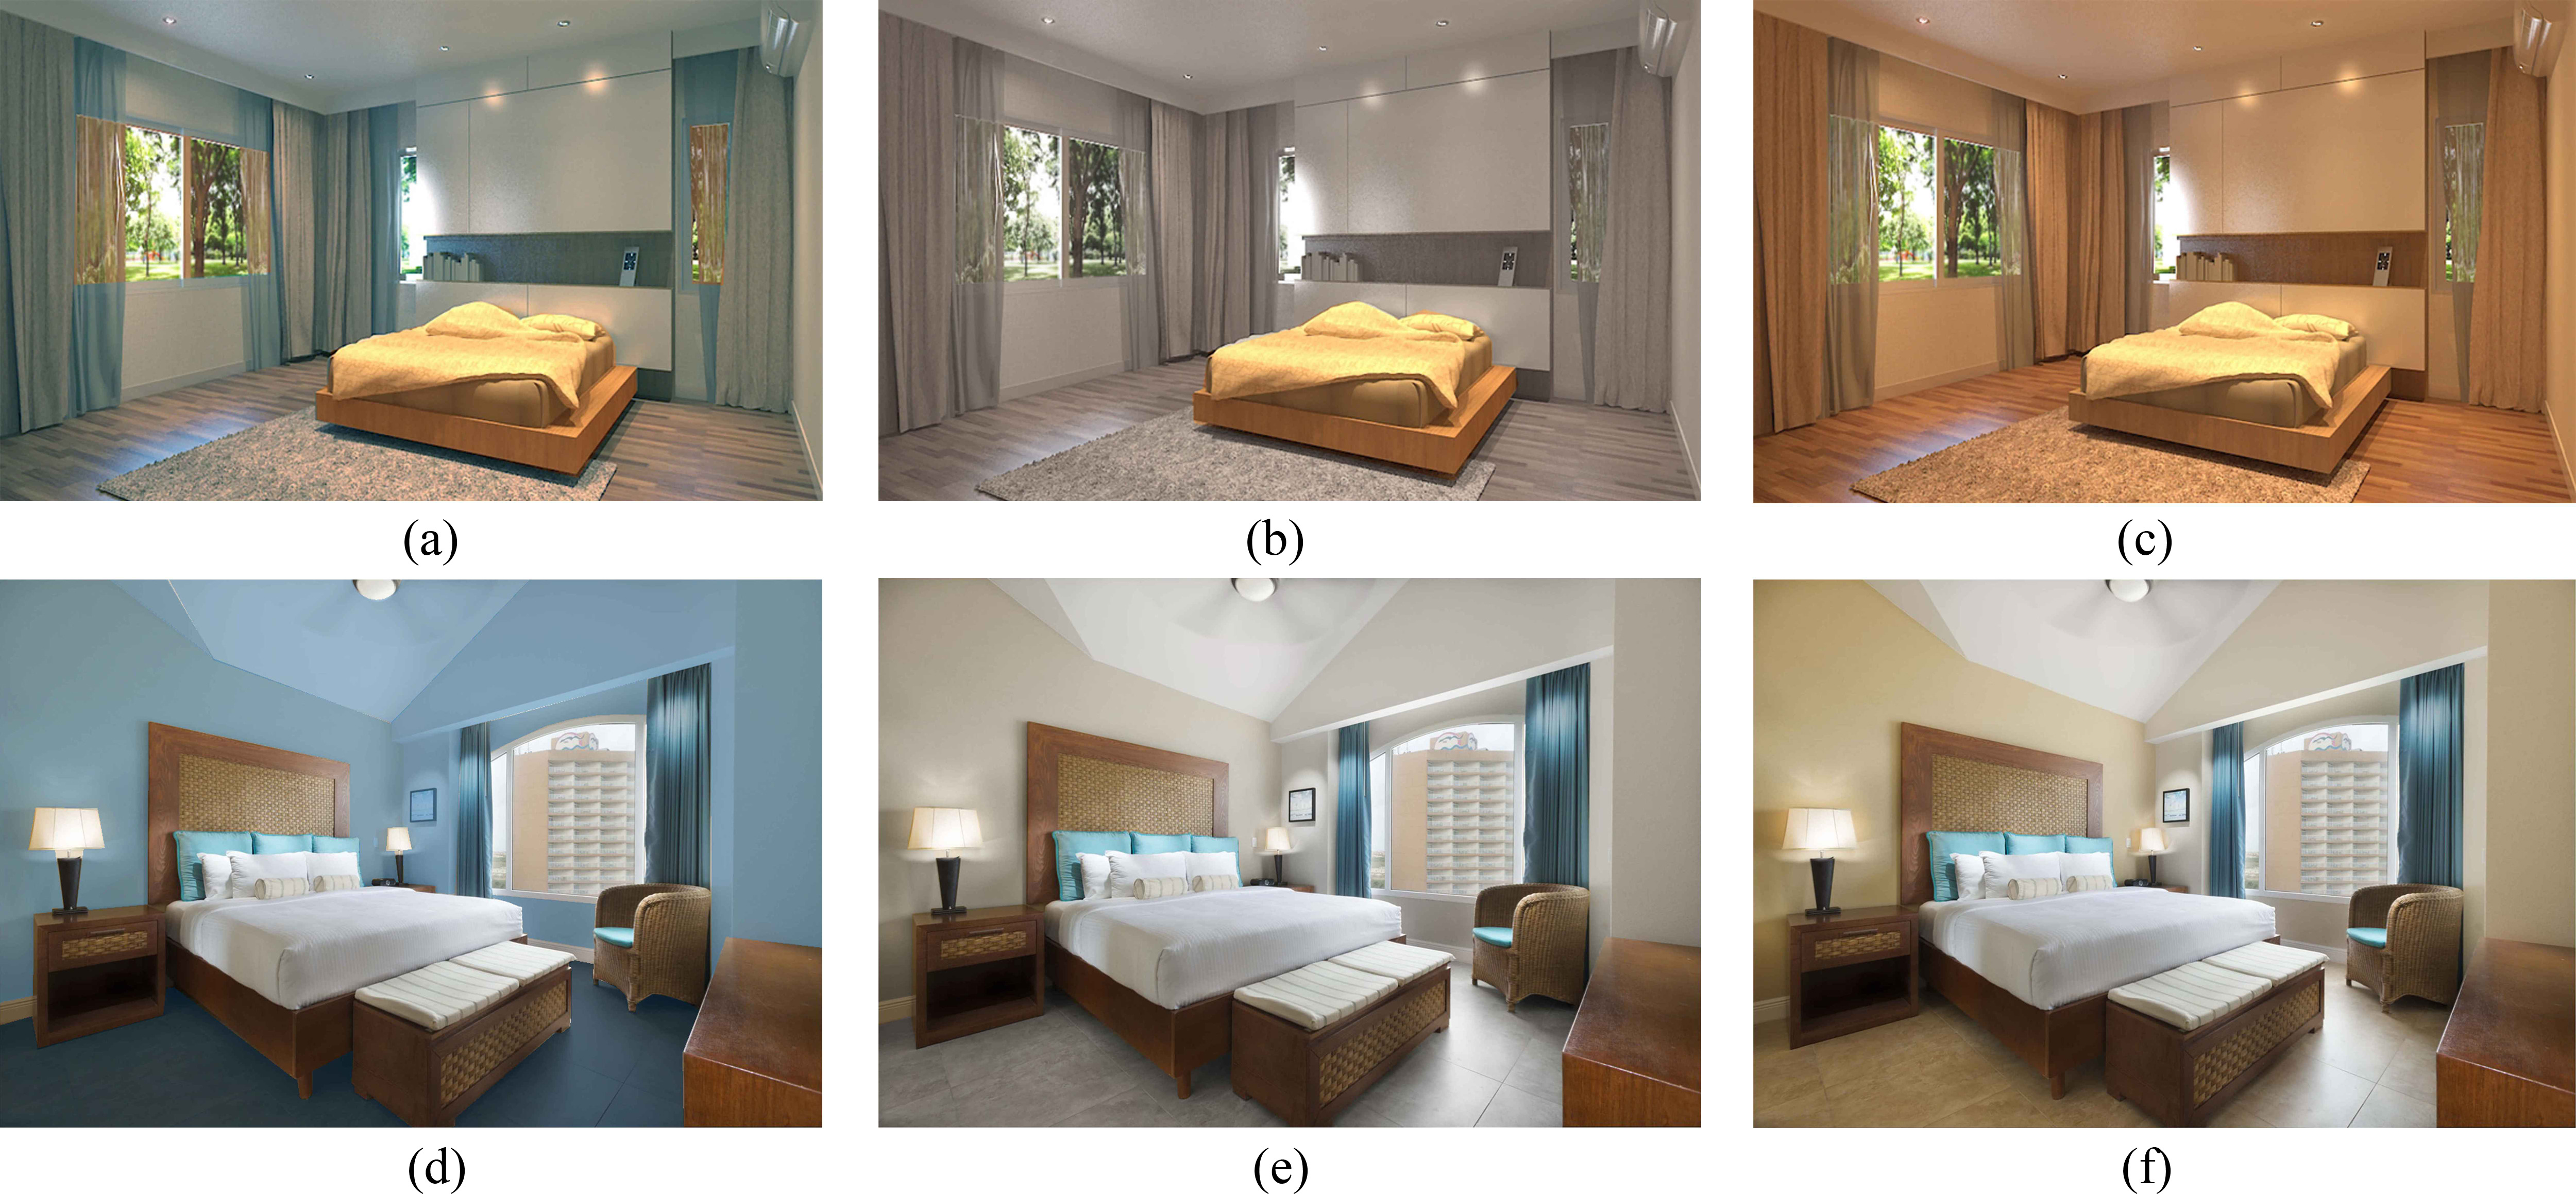 Examples of the test images in the first part. The effect of CCT (a) cool (6,500 K), (b) white (4,000 K), (c) warm (2,800 K). The effect of the room colour: (d) cool colour tone room surface, (e) white colour tone room surface, and (f) warm colour tone room surface.